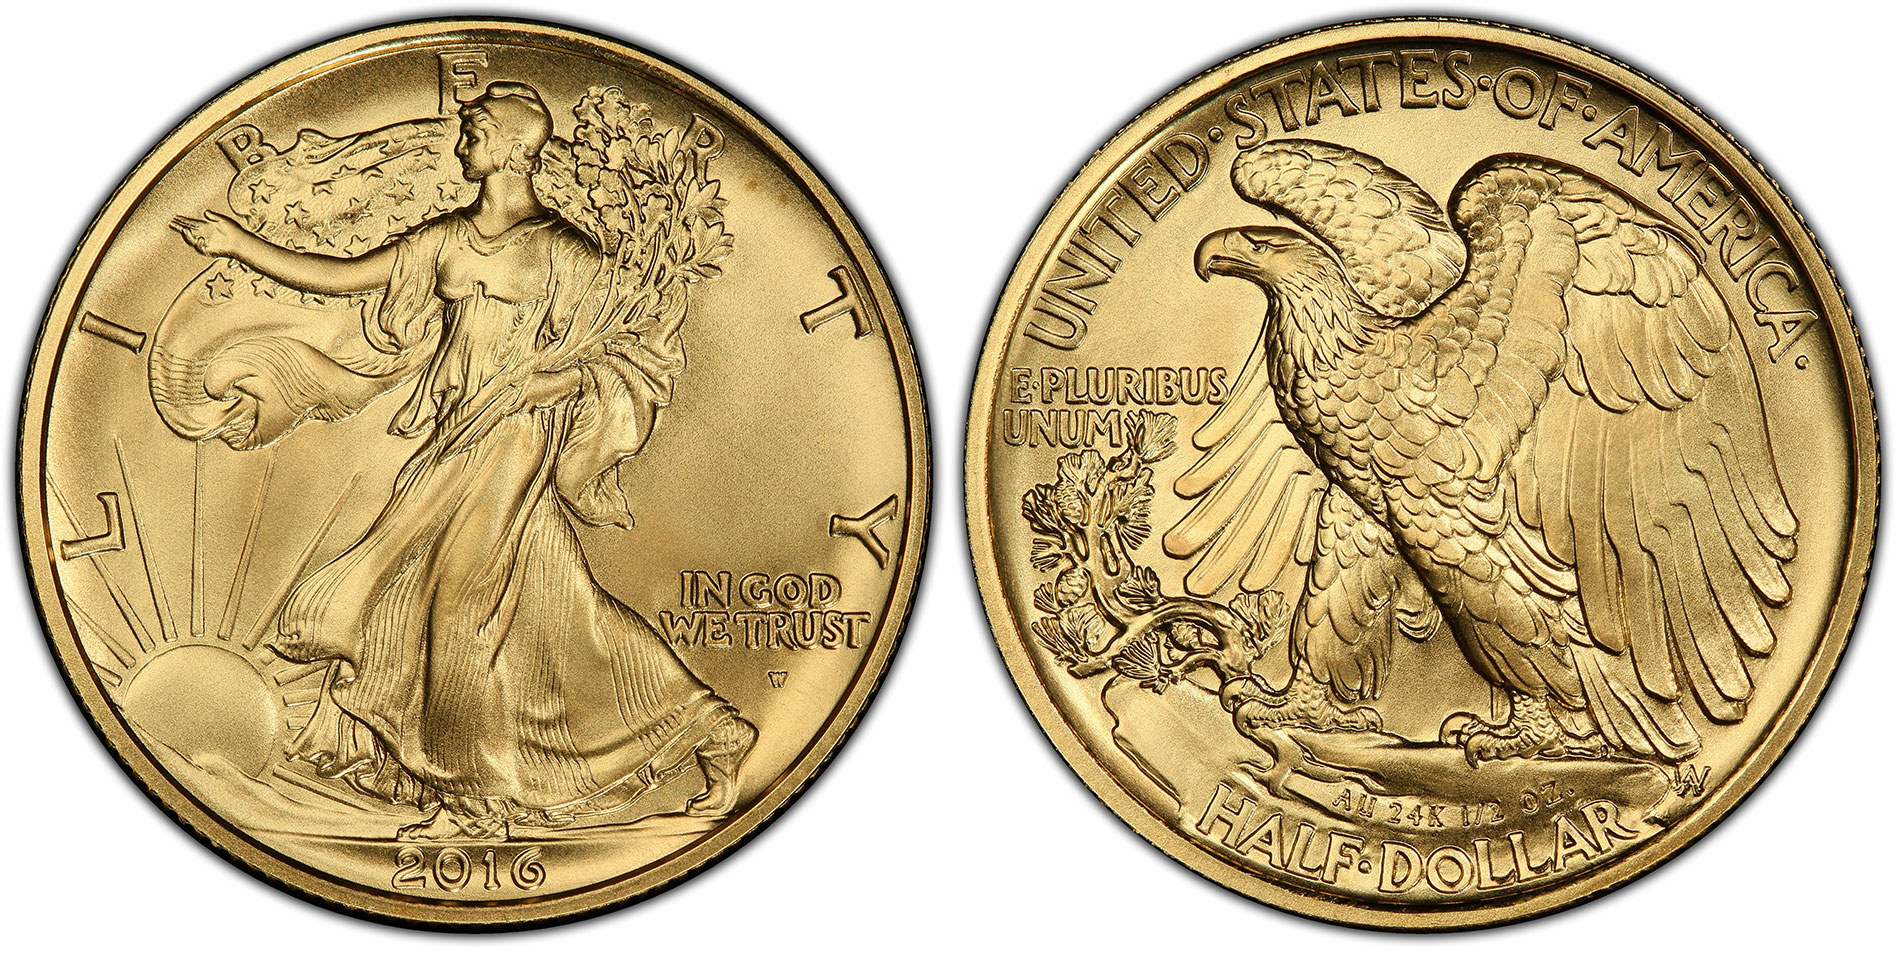 Classic Coinage Revived: The 2016 Centennial Series Gold Mercury Dime, Standing Liberty Quarter & Walking Liberty Half Dollar